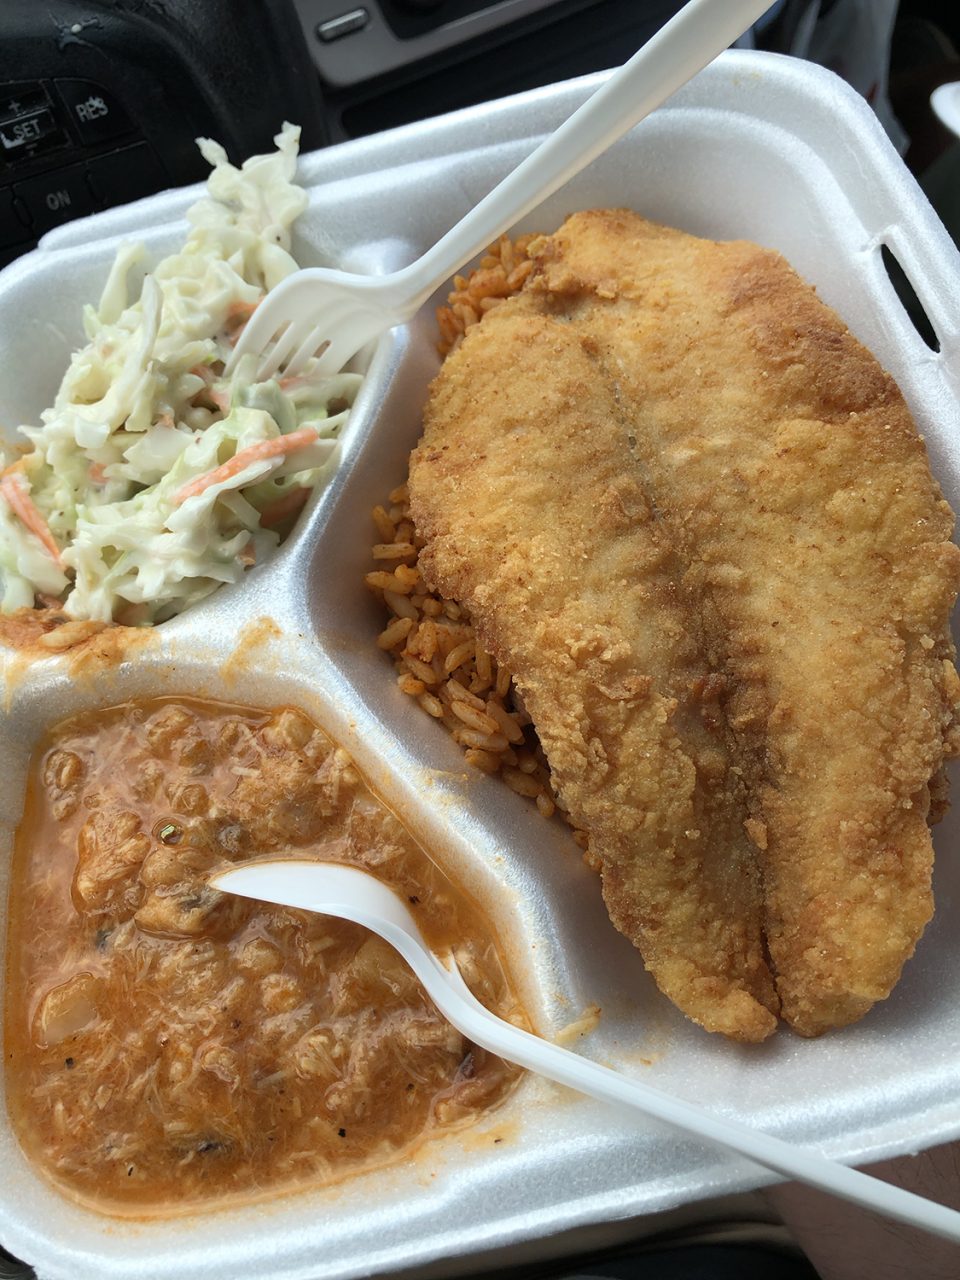 Lunch bought from a roadside vendor in the parking lot of a small market on Edisto Island. Fried catfish, jambalaya, catfish stew, and cole slaw. 